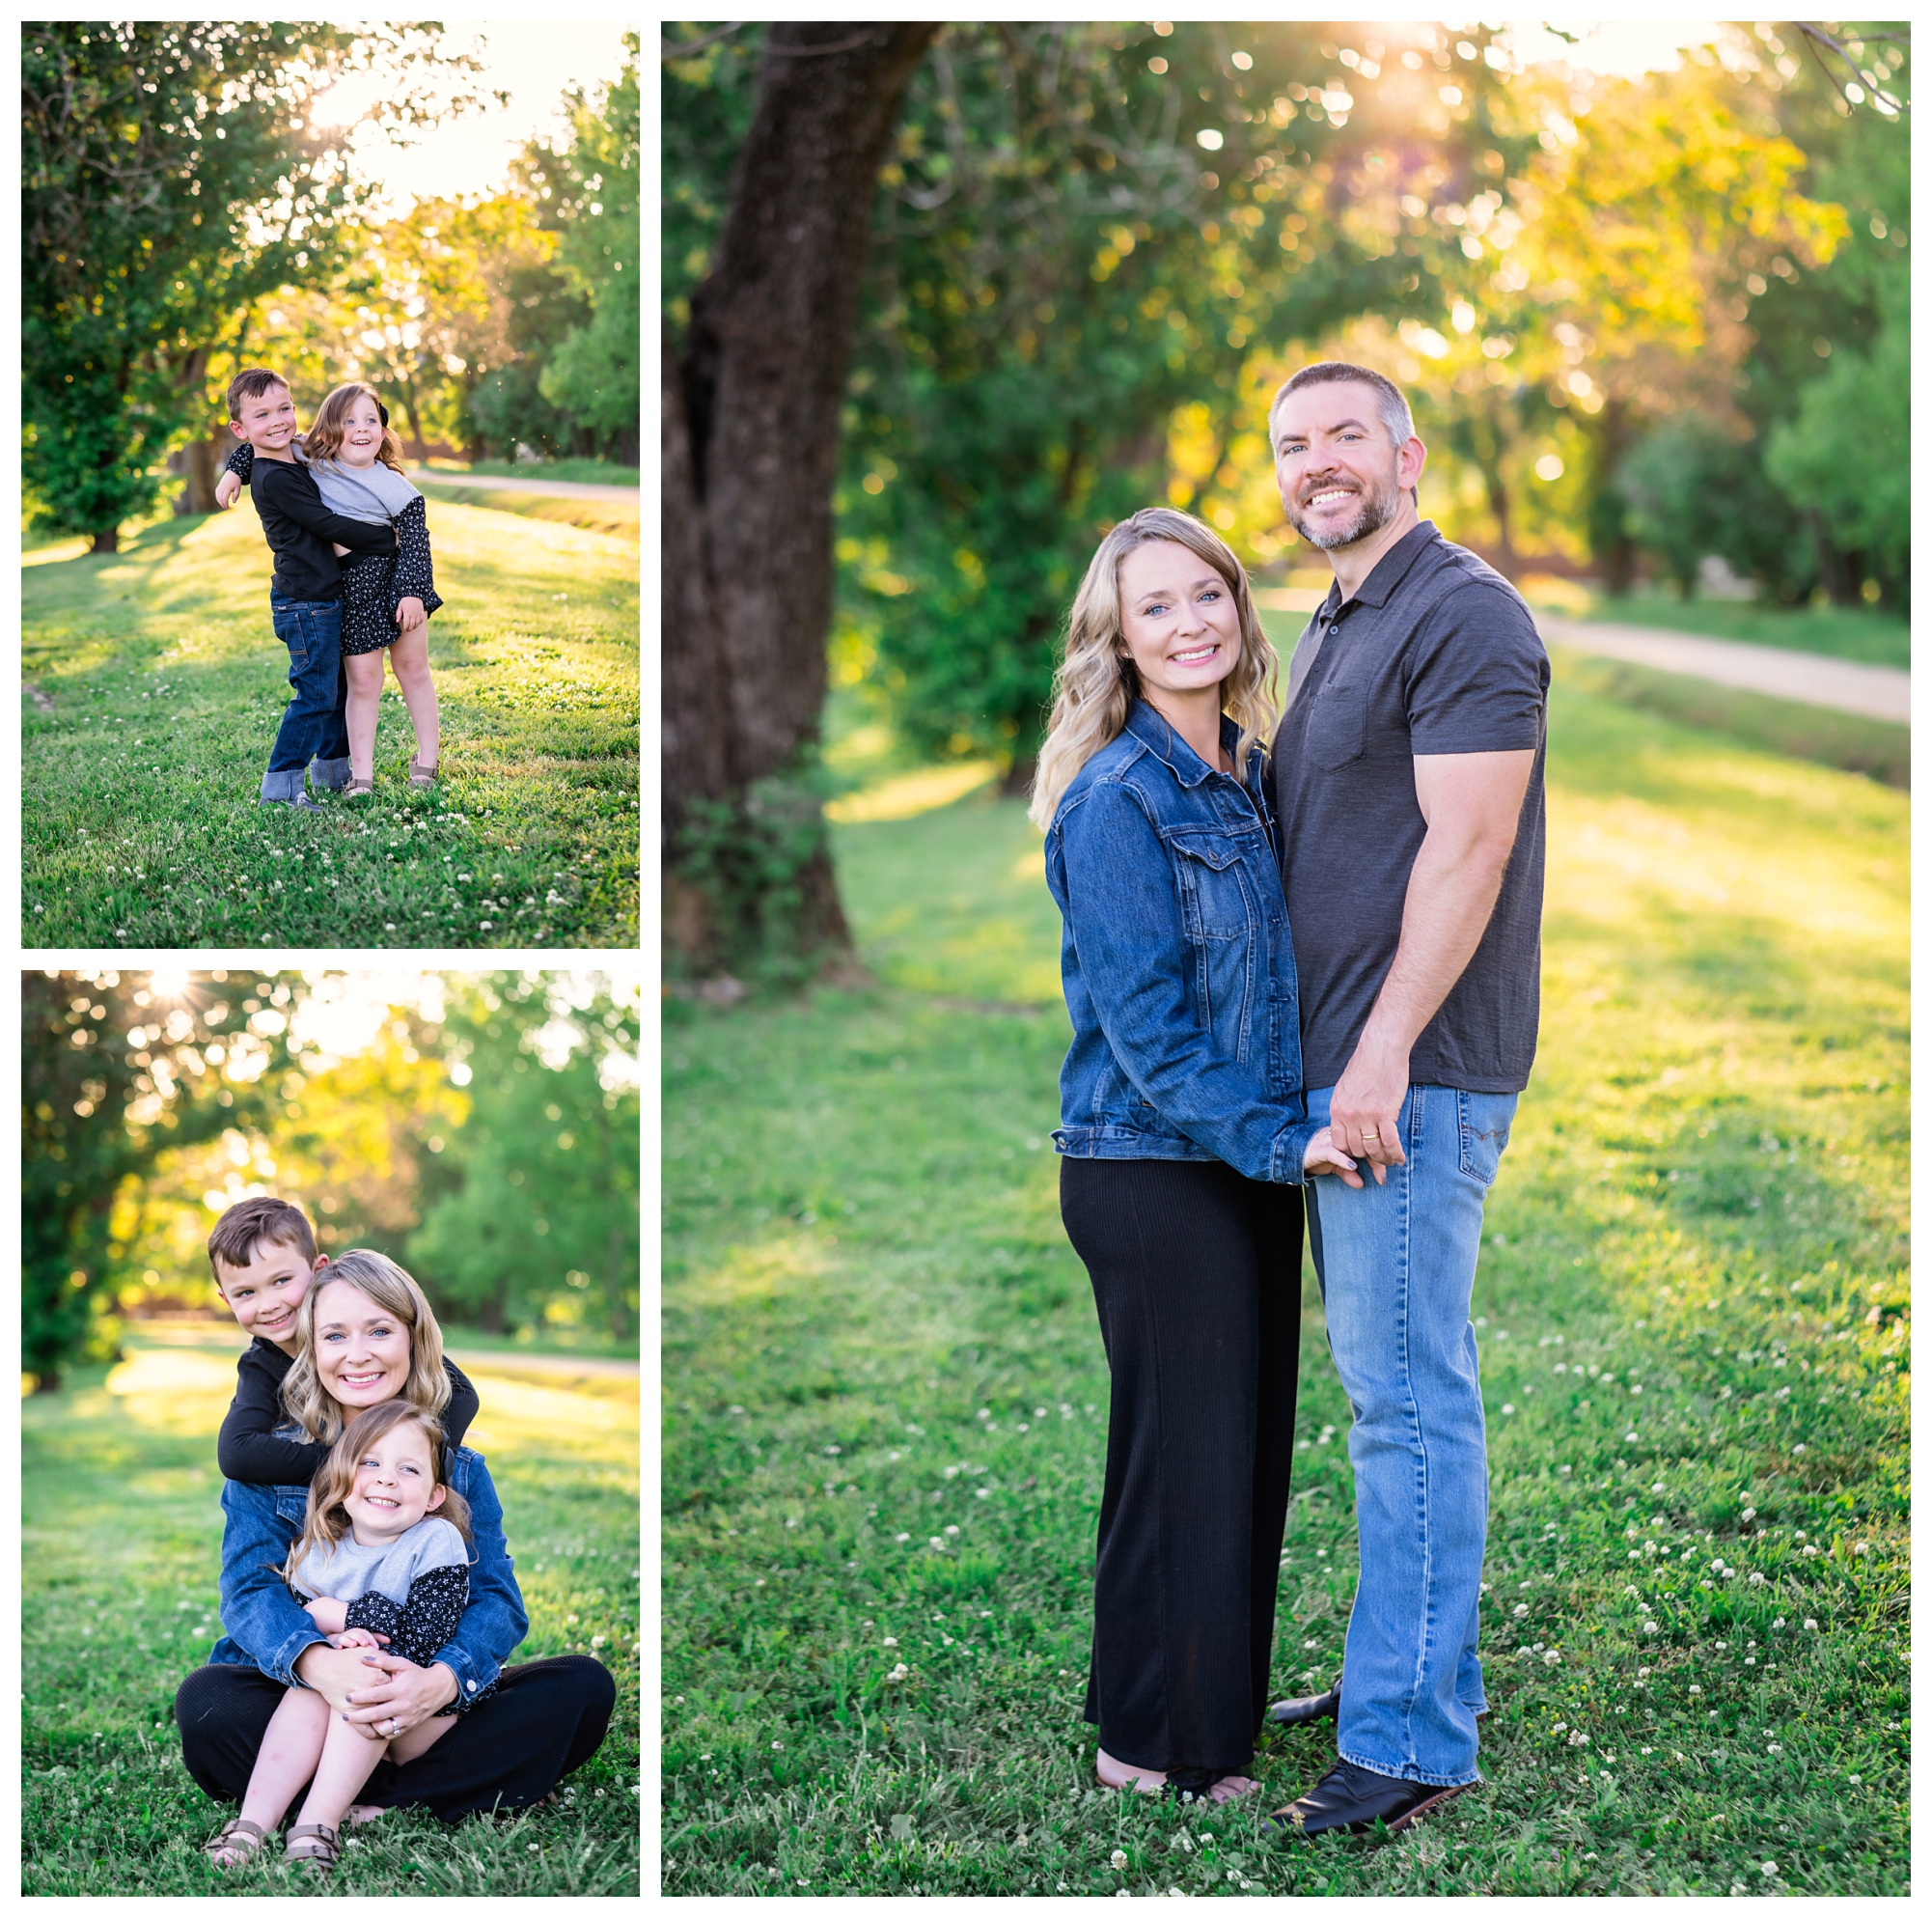 Summer family photo session in Virginia | Melissa Sheridan Photography